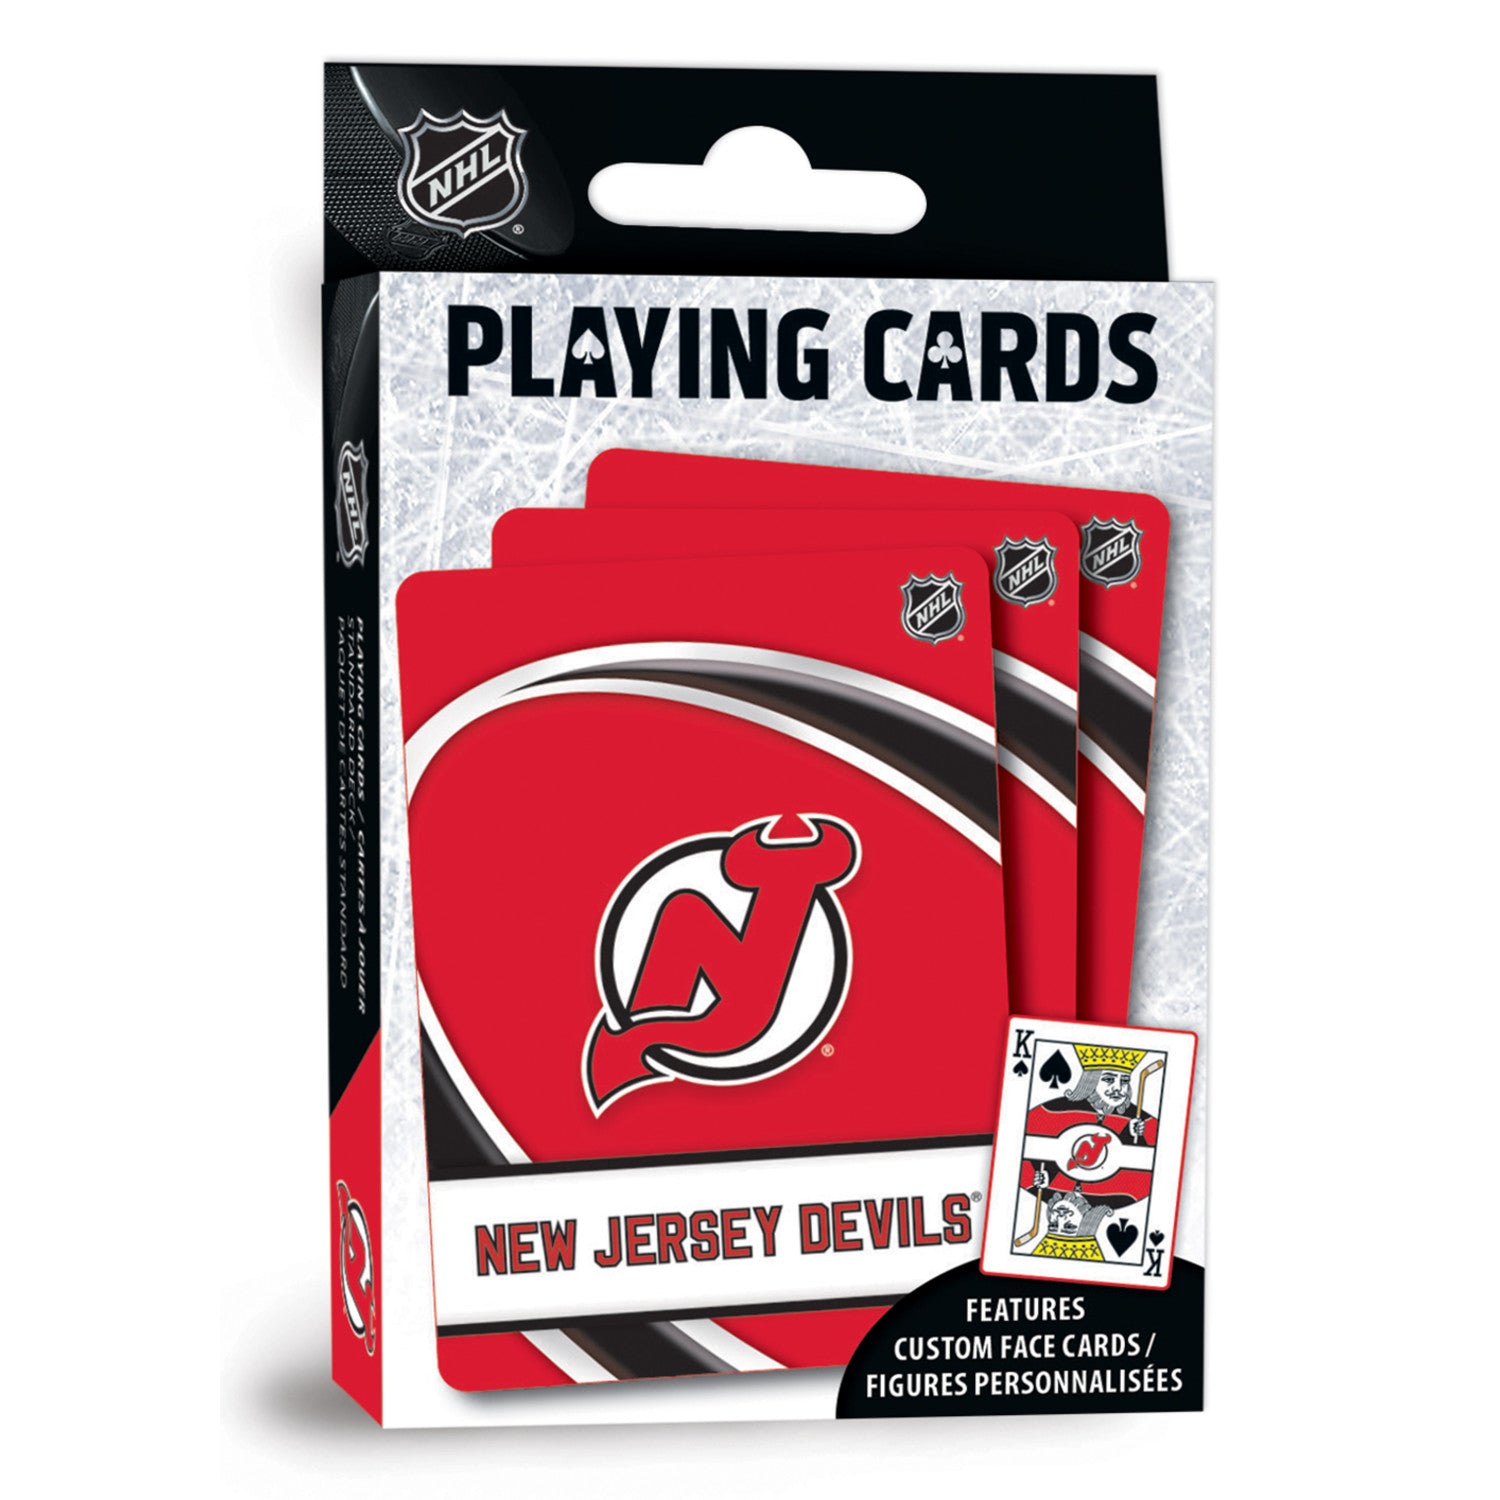 New Jersey Devils Playing Cards - 54 Card Deck